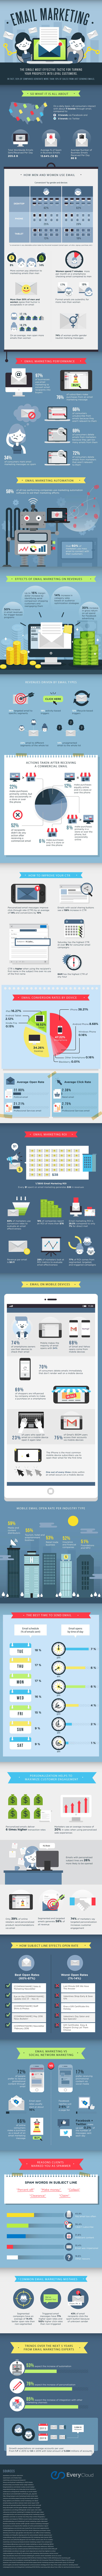 Email Marketing Infographic 2019